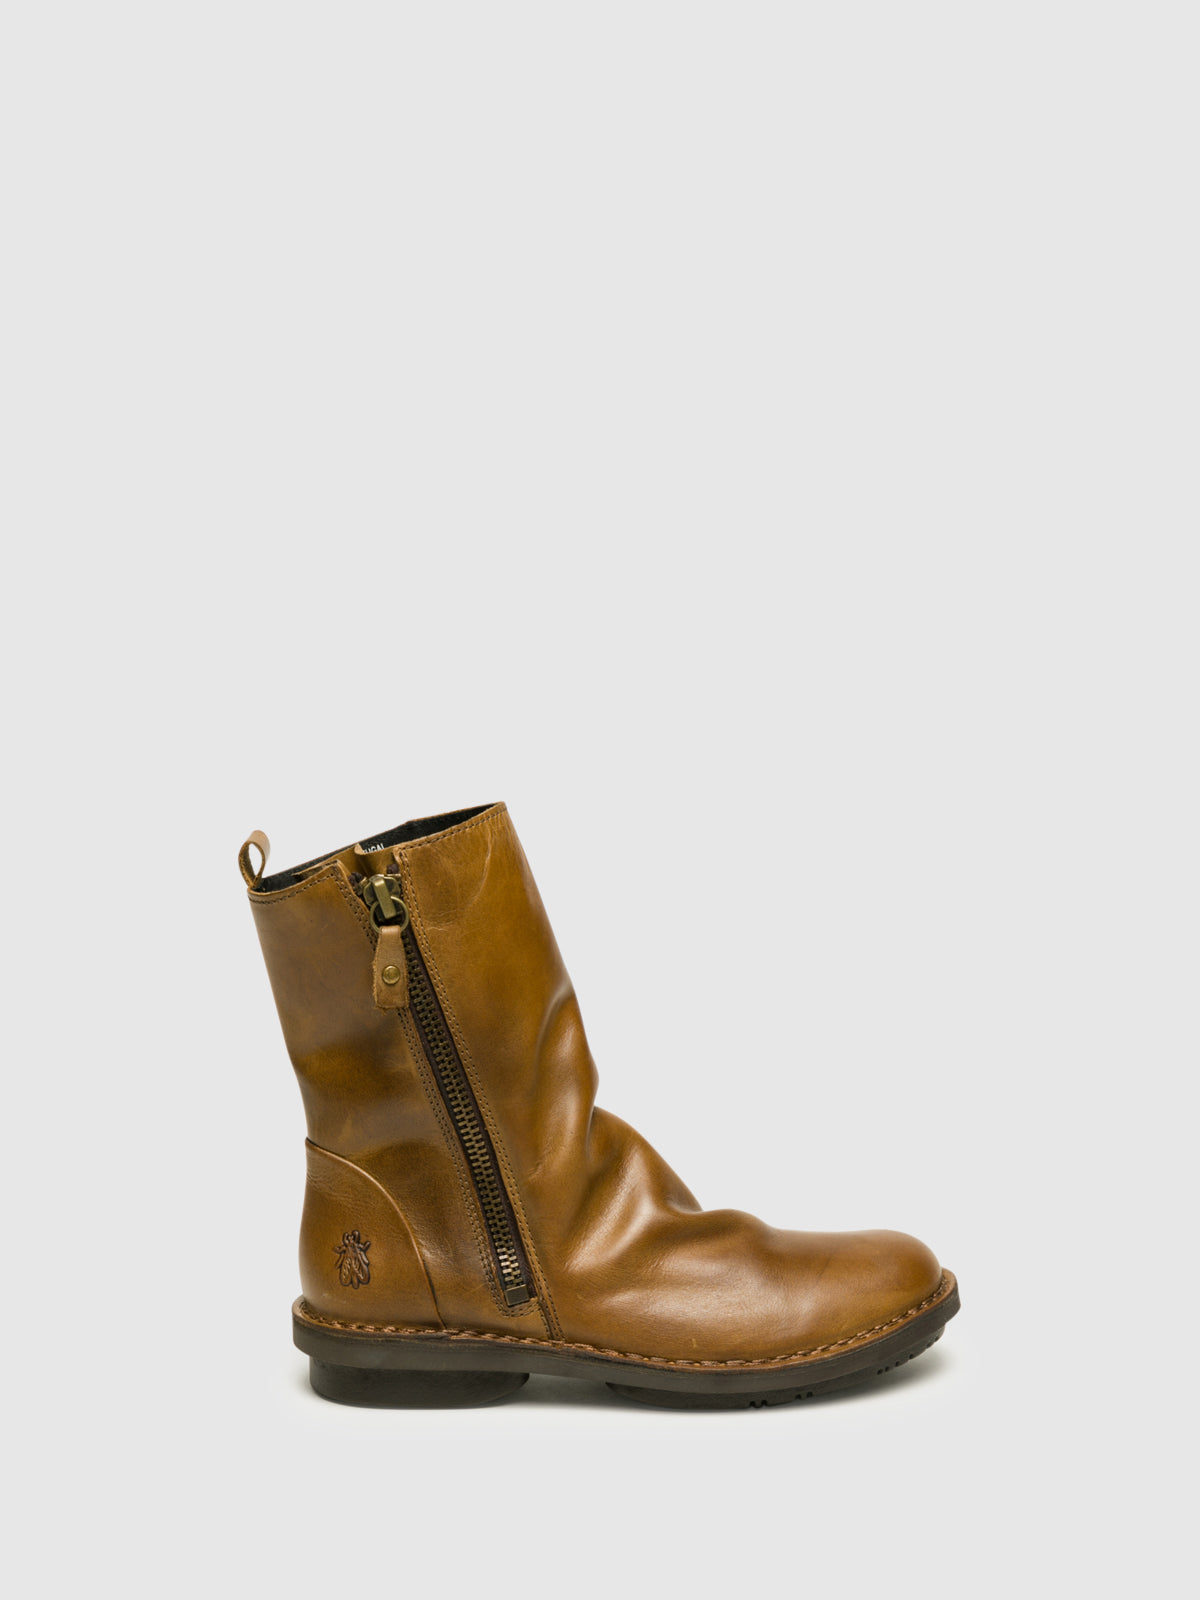 Fly London SandyBrown Zip Up Ankle Boots